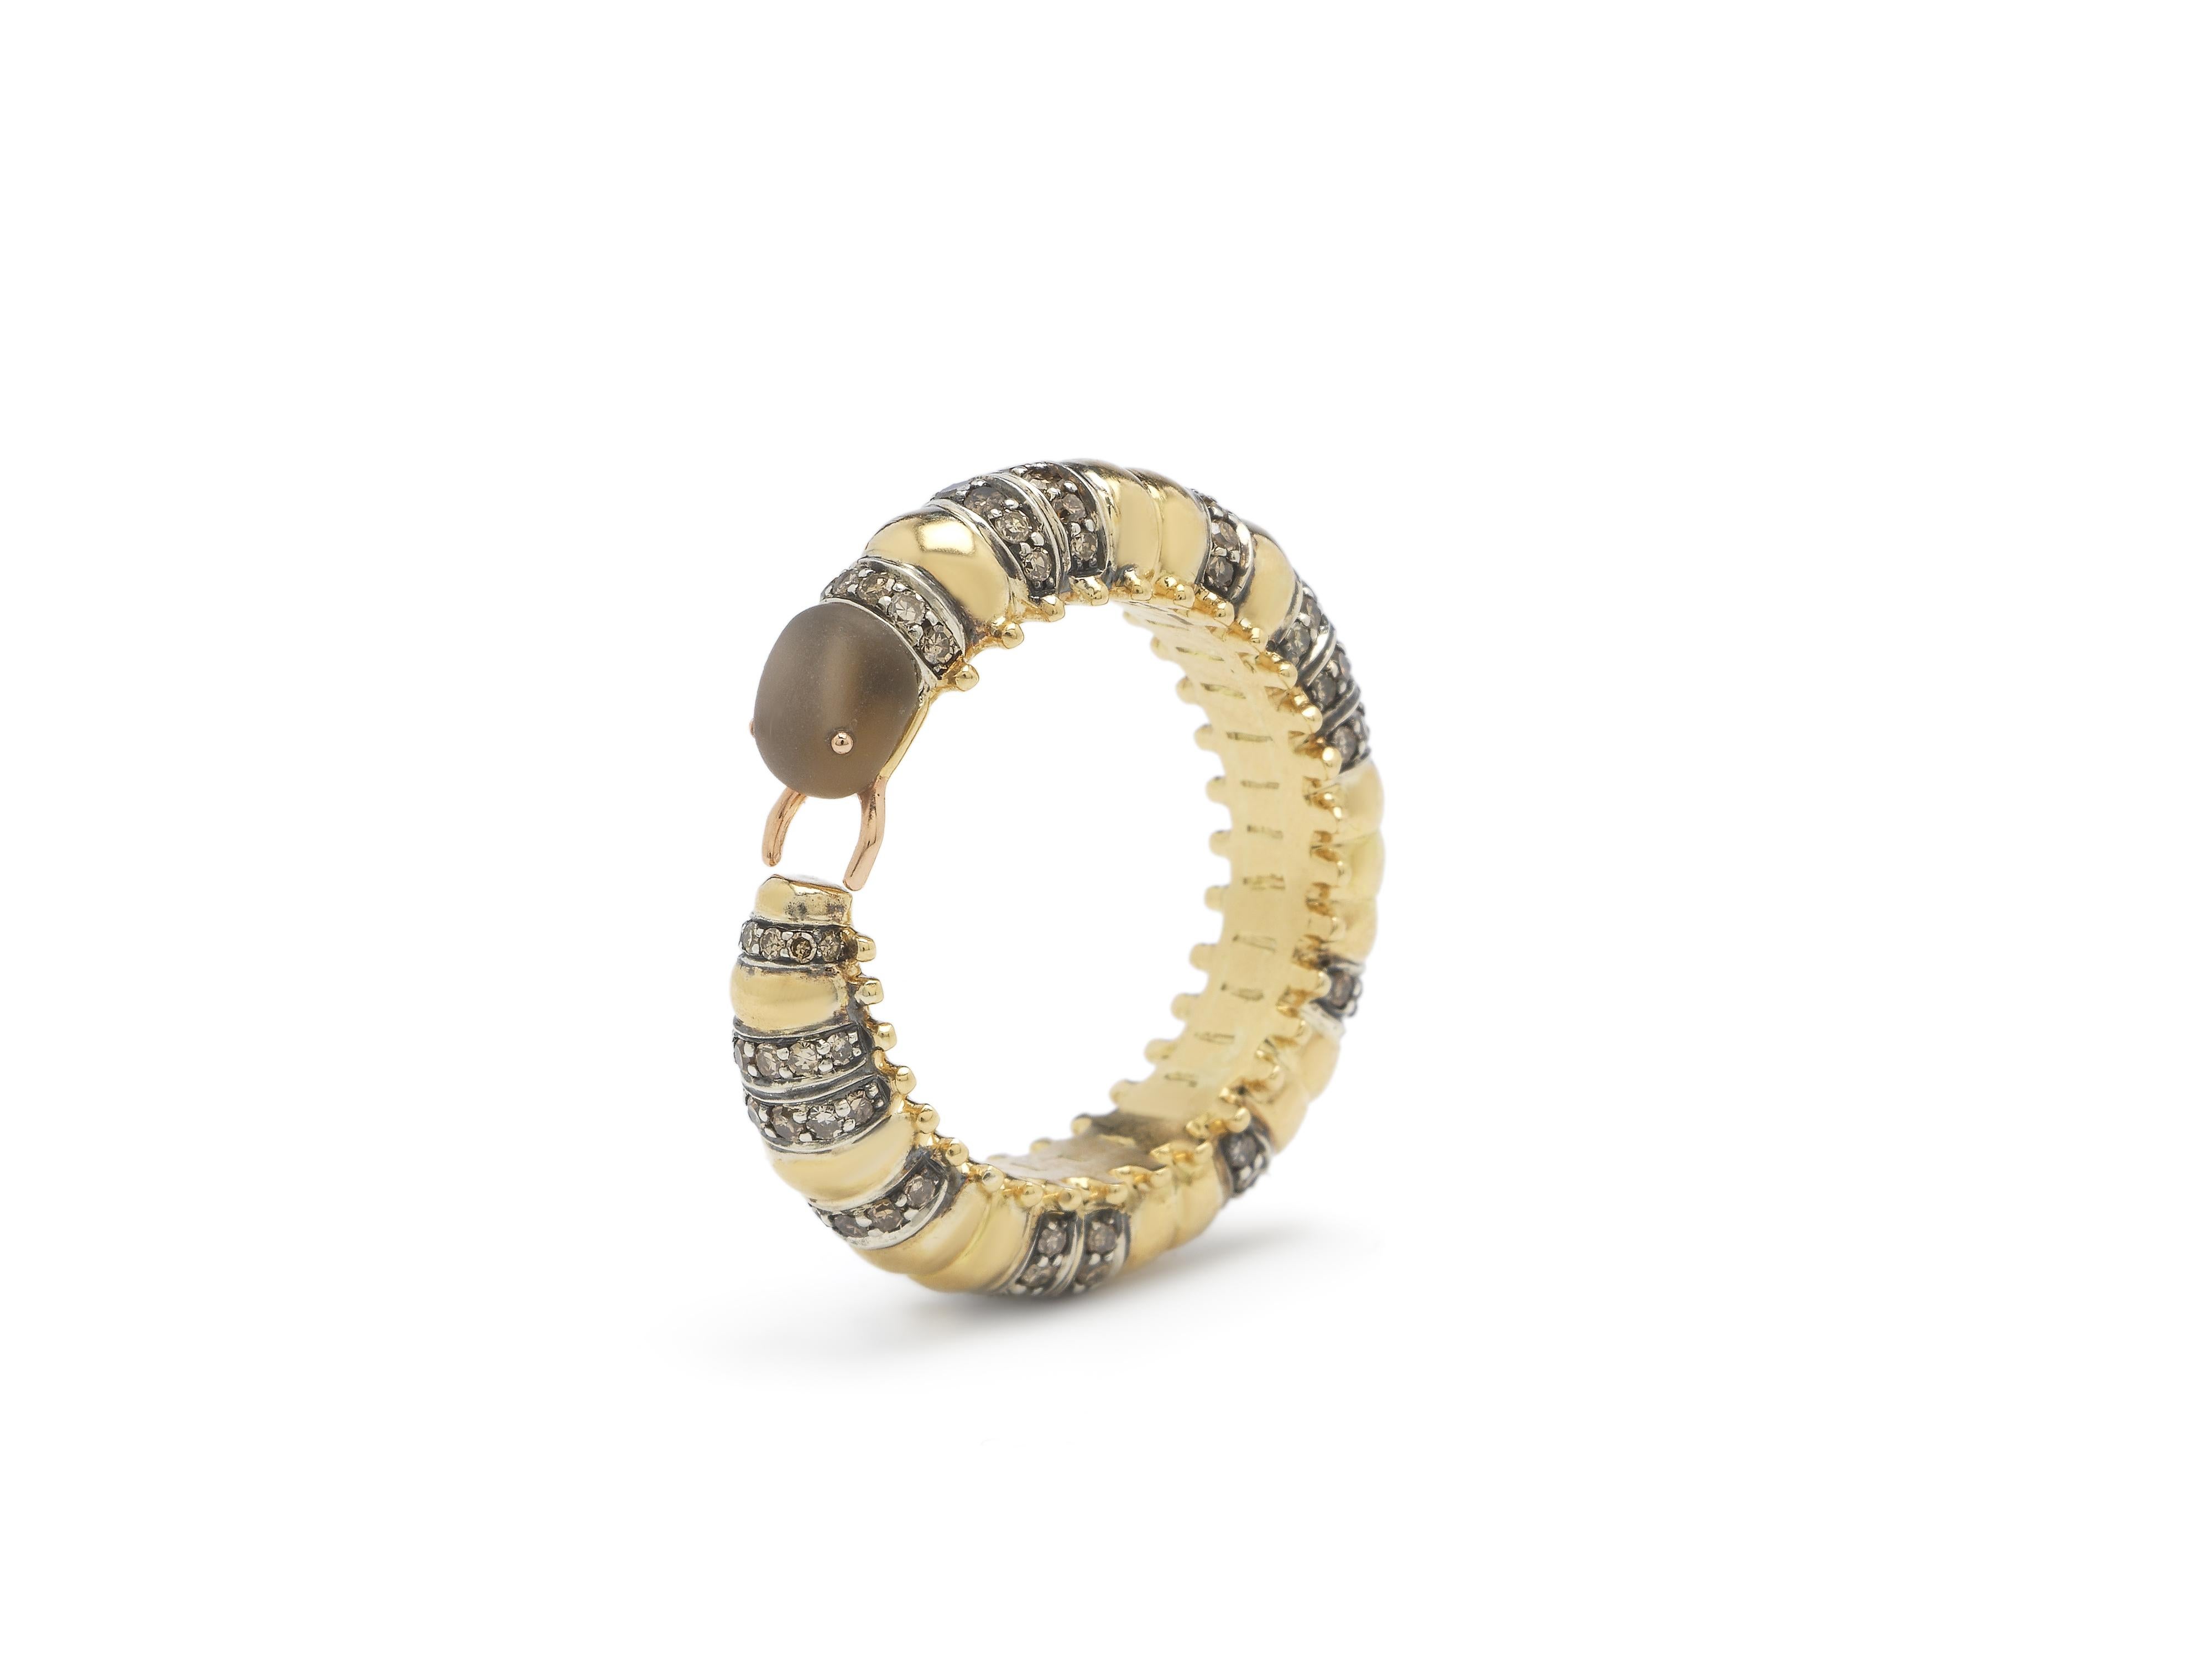 A millipede curves around the finger to form this unique, head-turning eternity ring. The ring is fashioned in 18k yellow gold and sterling silver, with the insect boasting brown diamond embellishments along its body, with its head carved in ash